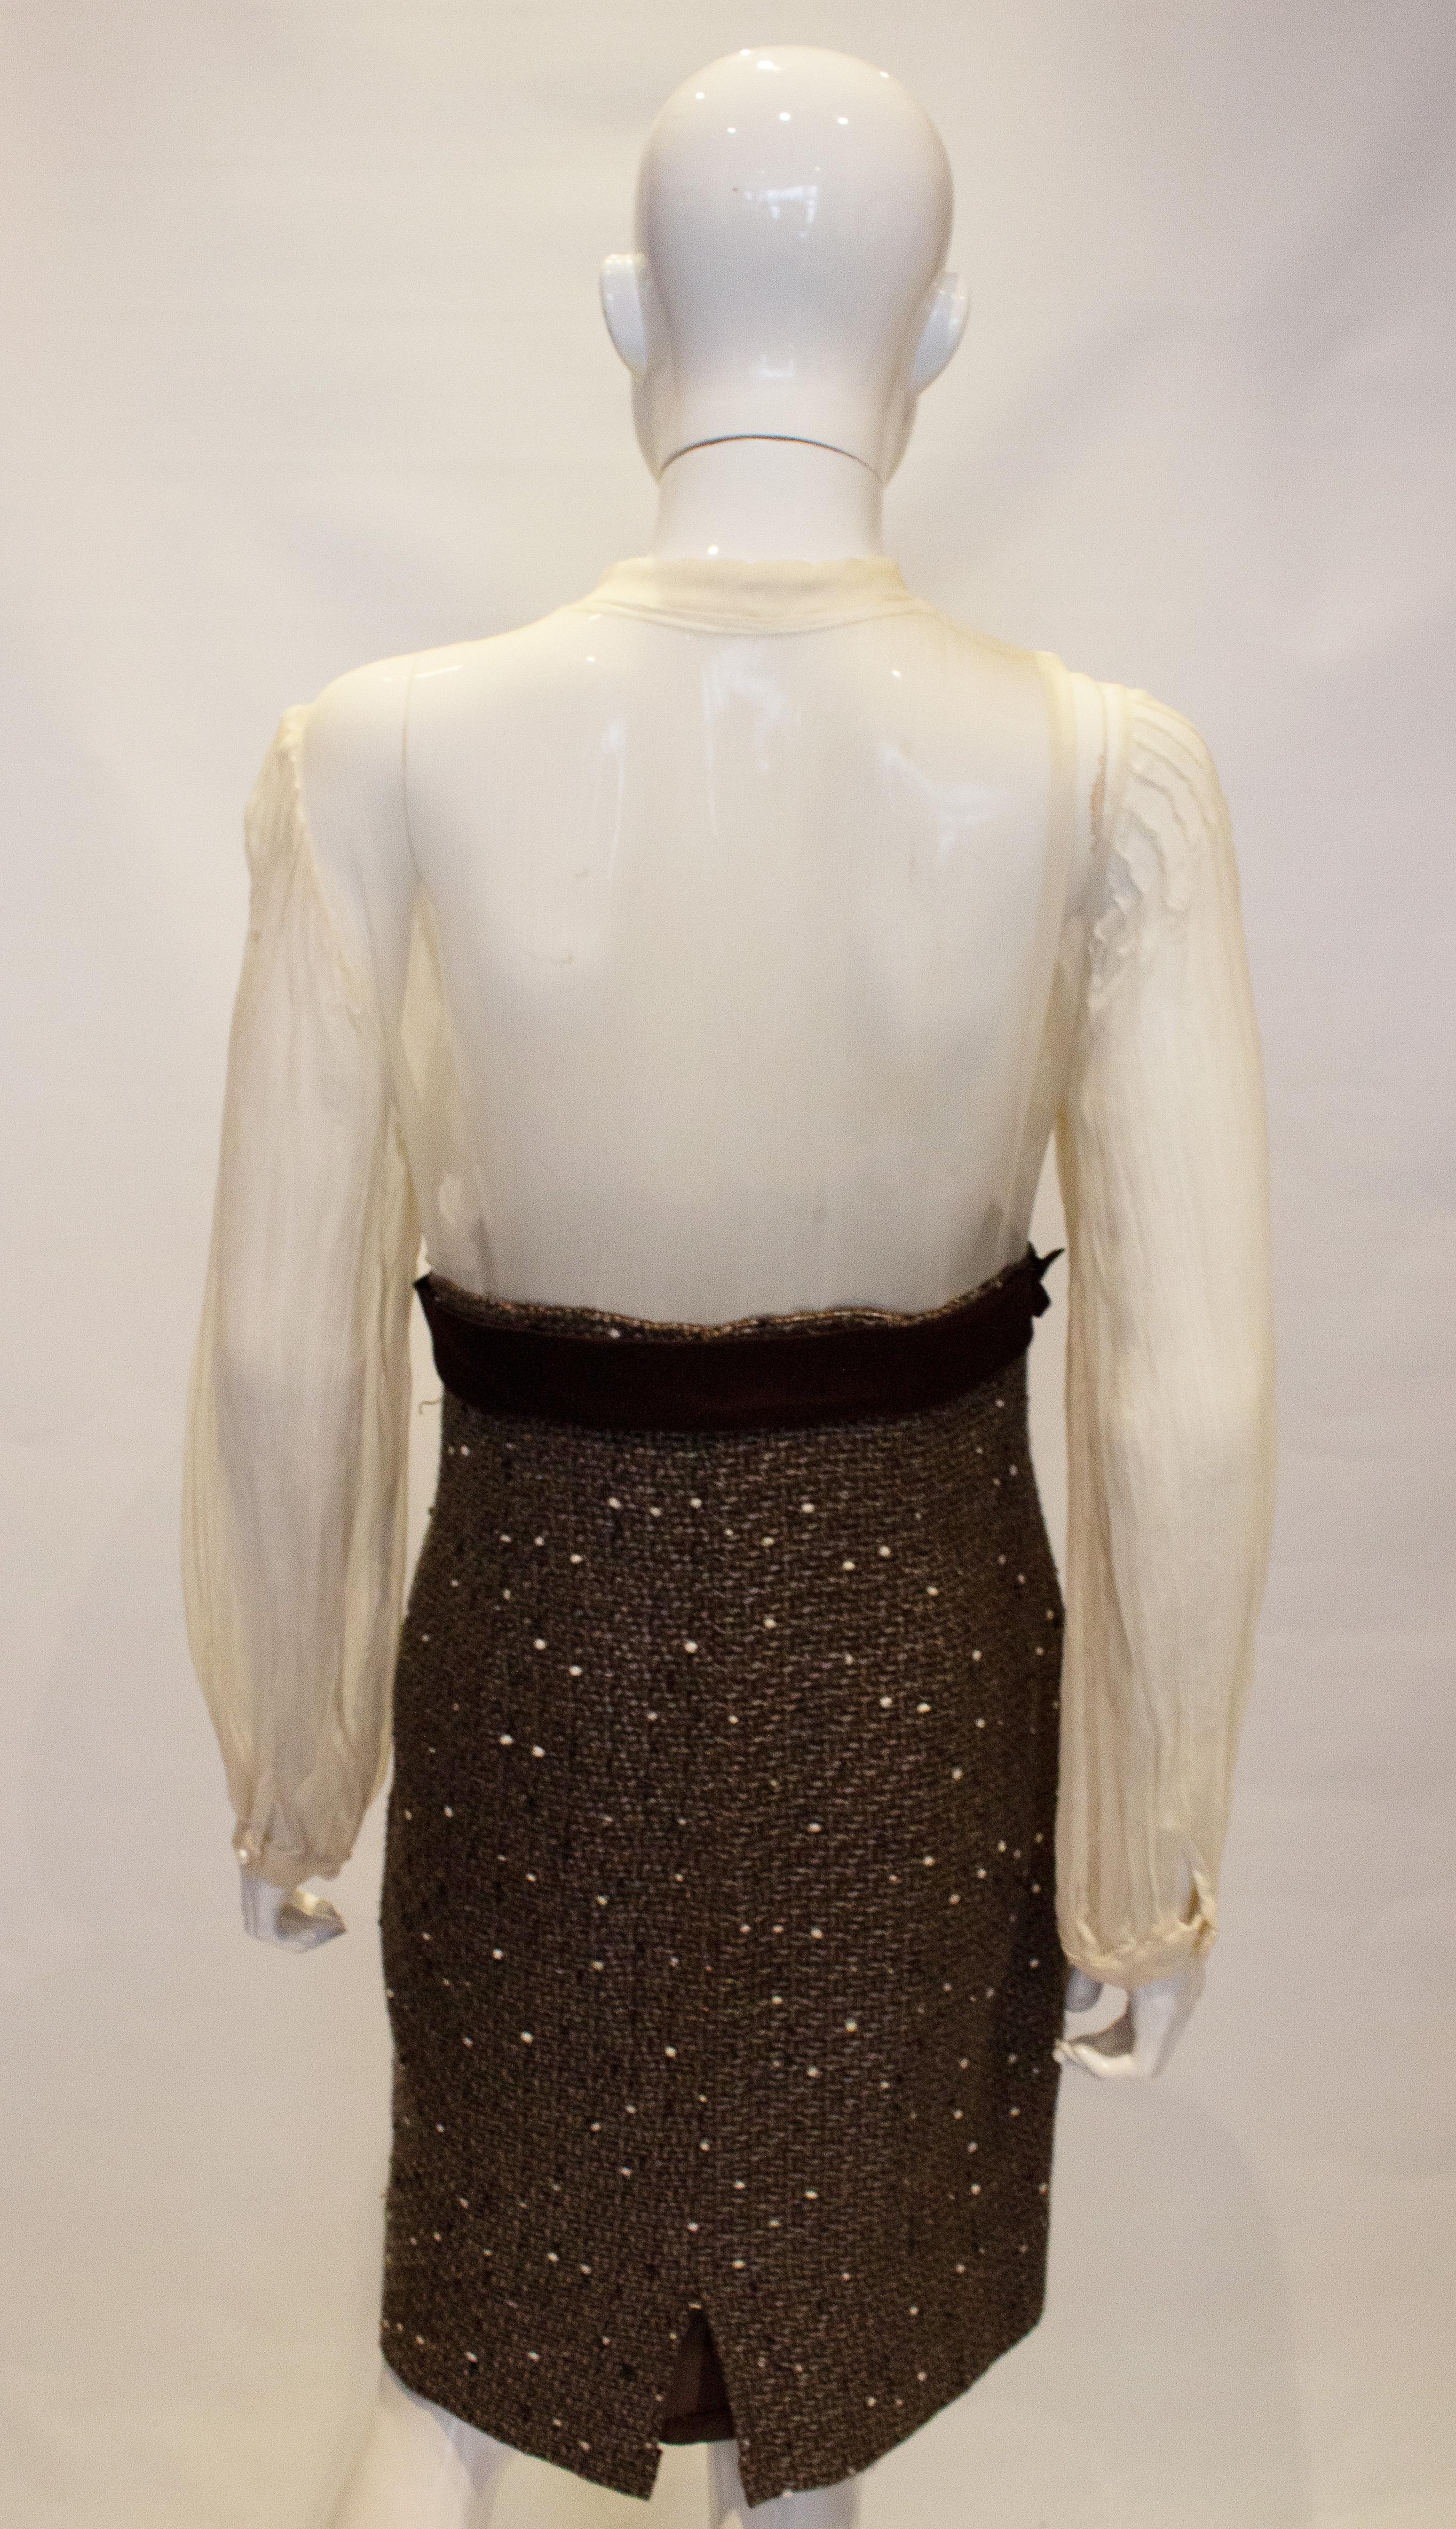 A wonderful vintage work to dinner dress. The top part is in a sheer silk chiffon decorated with pearls and lace. It has a mandarin collar and pleats on the sleave.  There is a brown silk bow and tweed skirt. The skirt is lined and there is a side